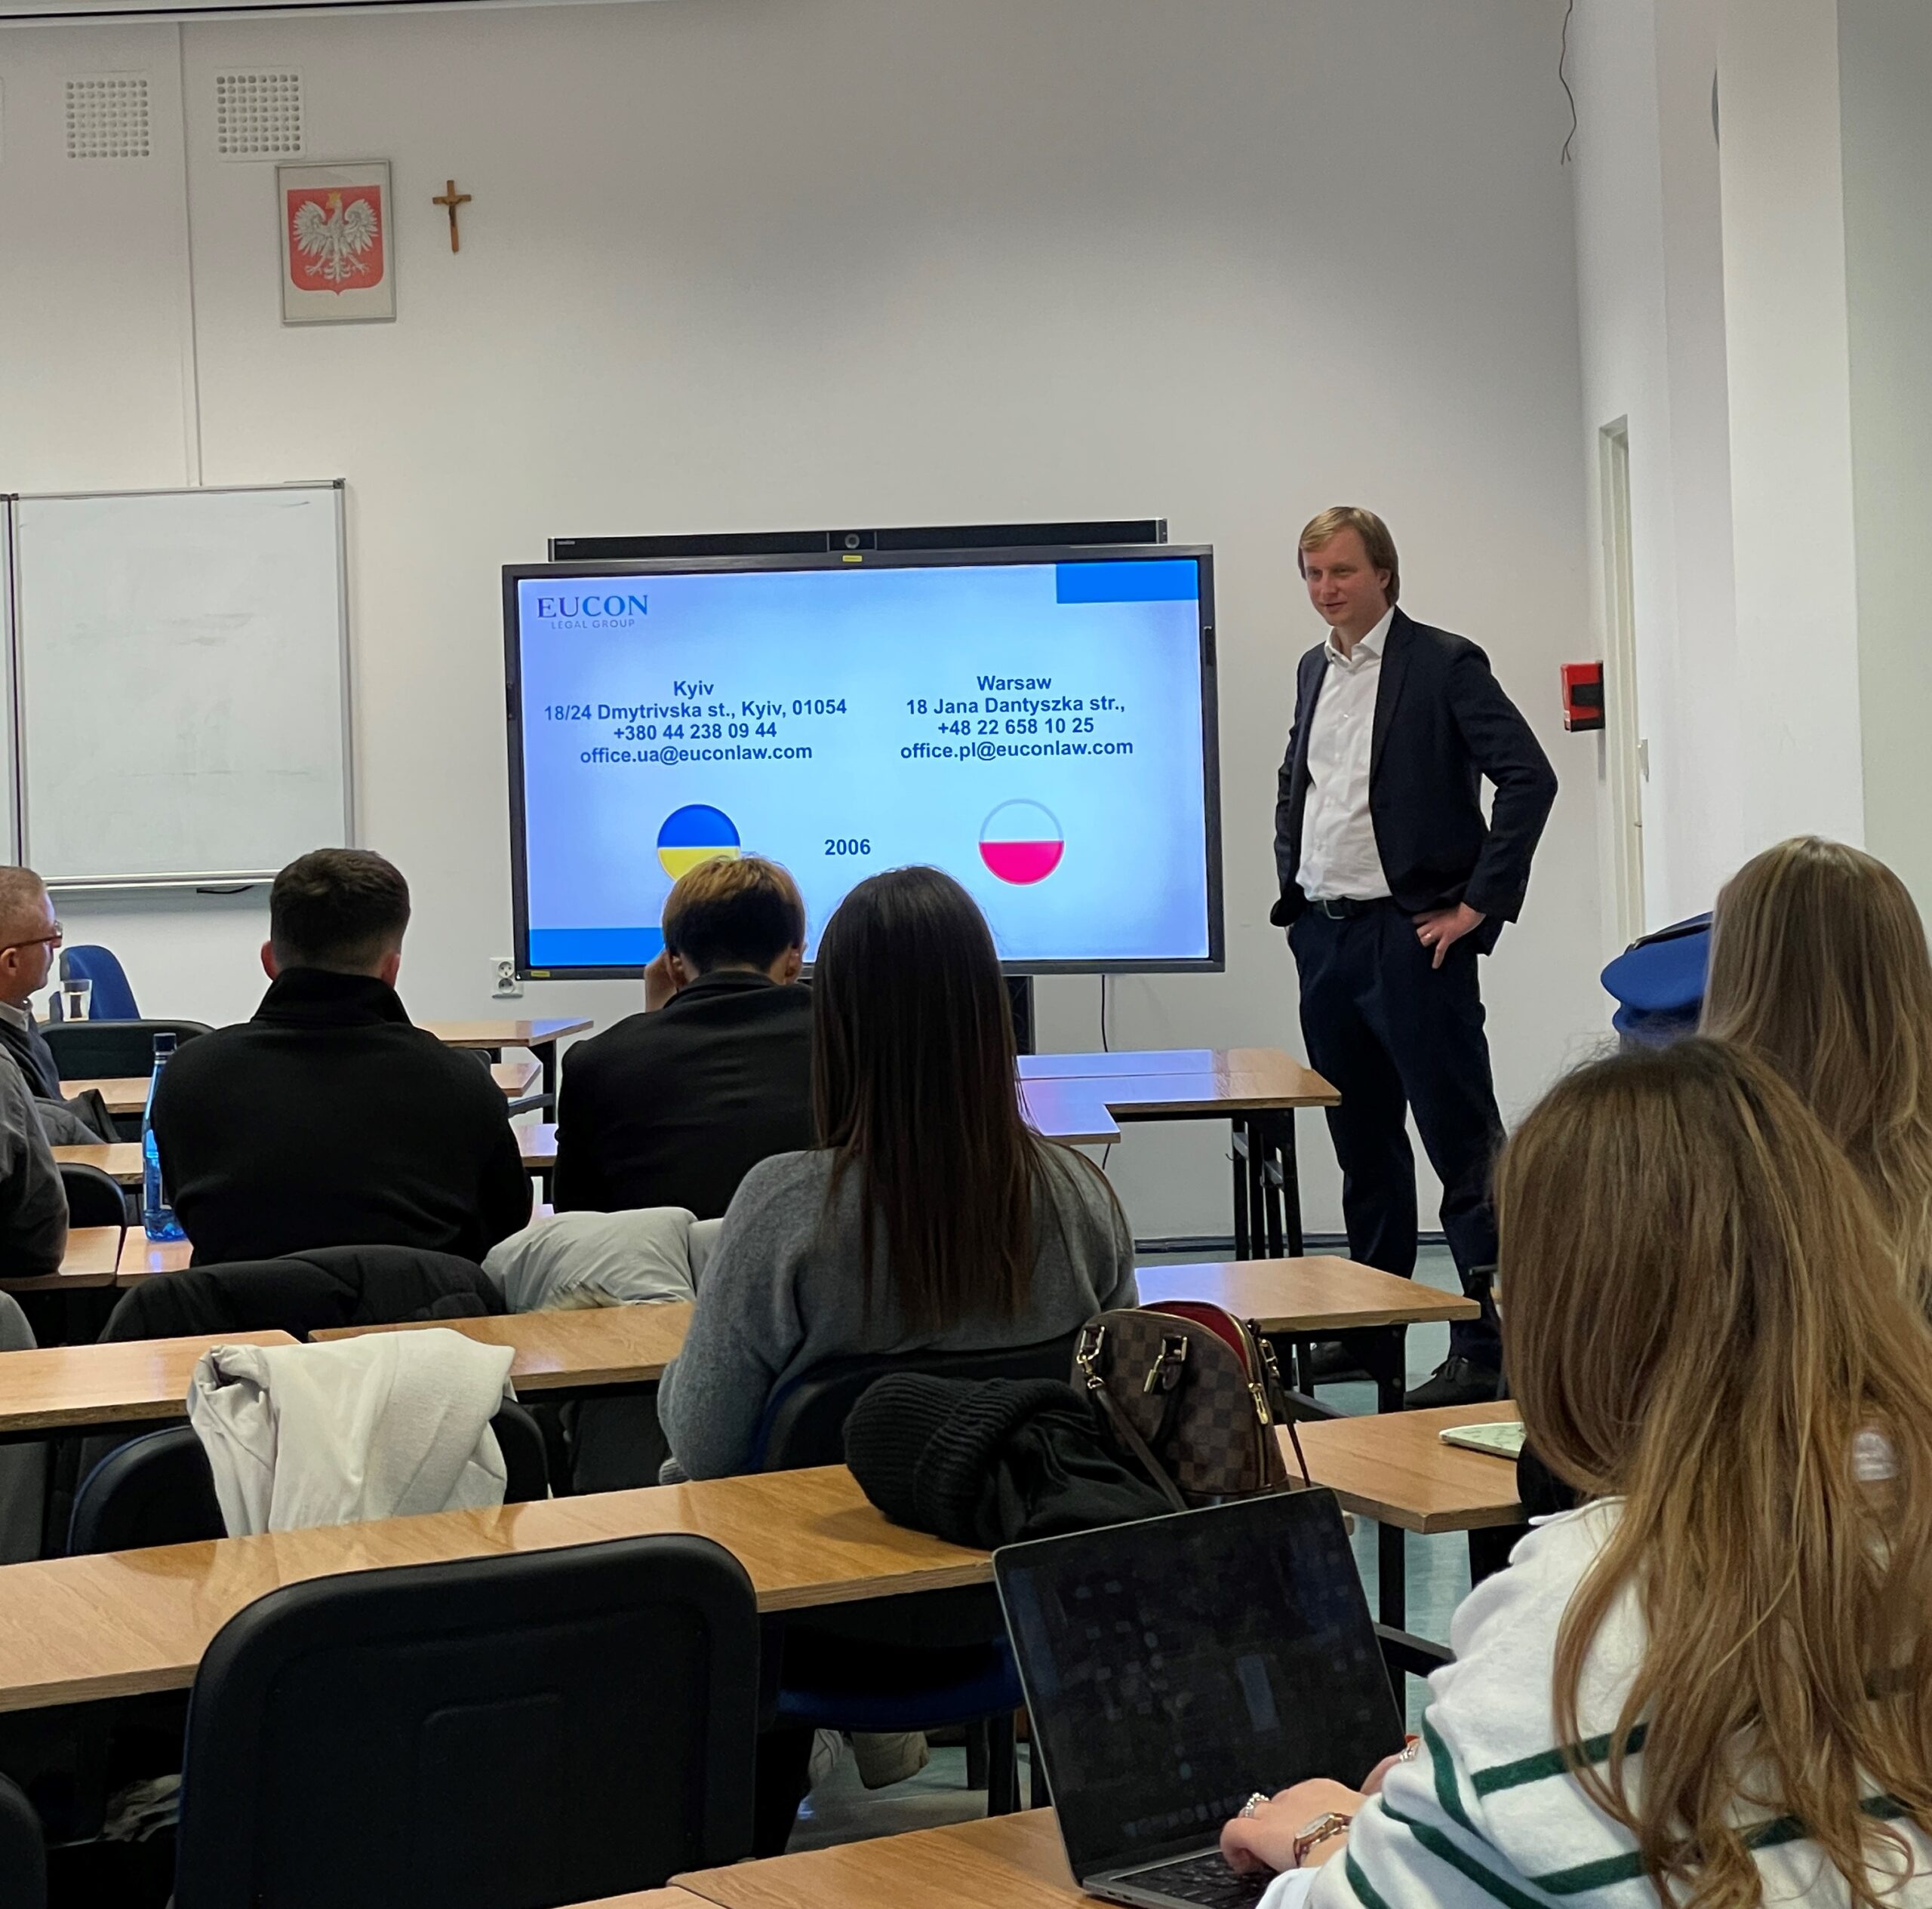 New business generation: Andrii Romanchuk lectured students of Lazarski University in Warsaw about doing business in Poland